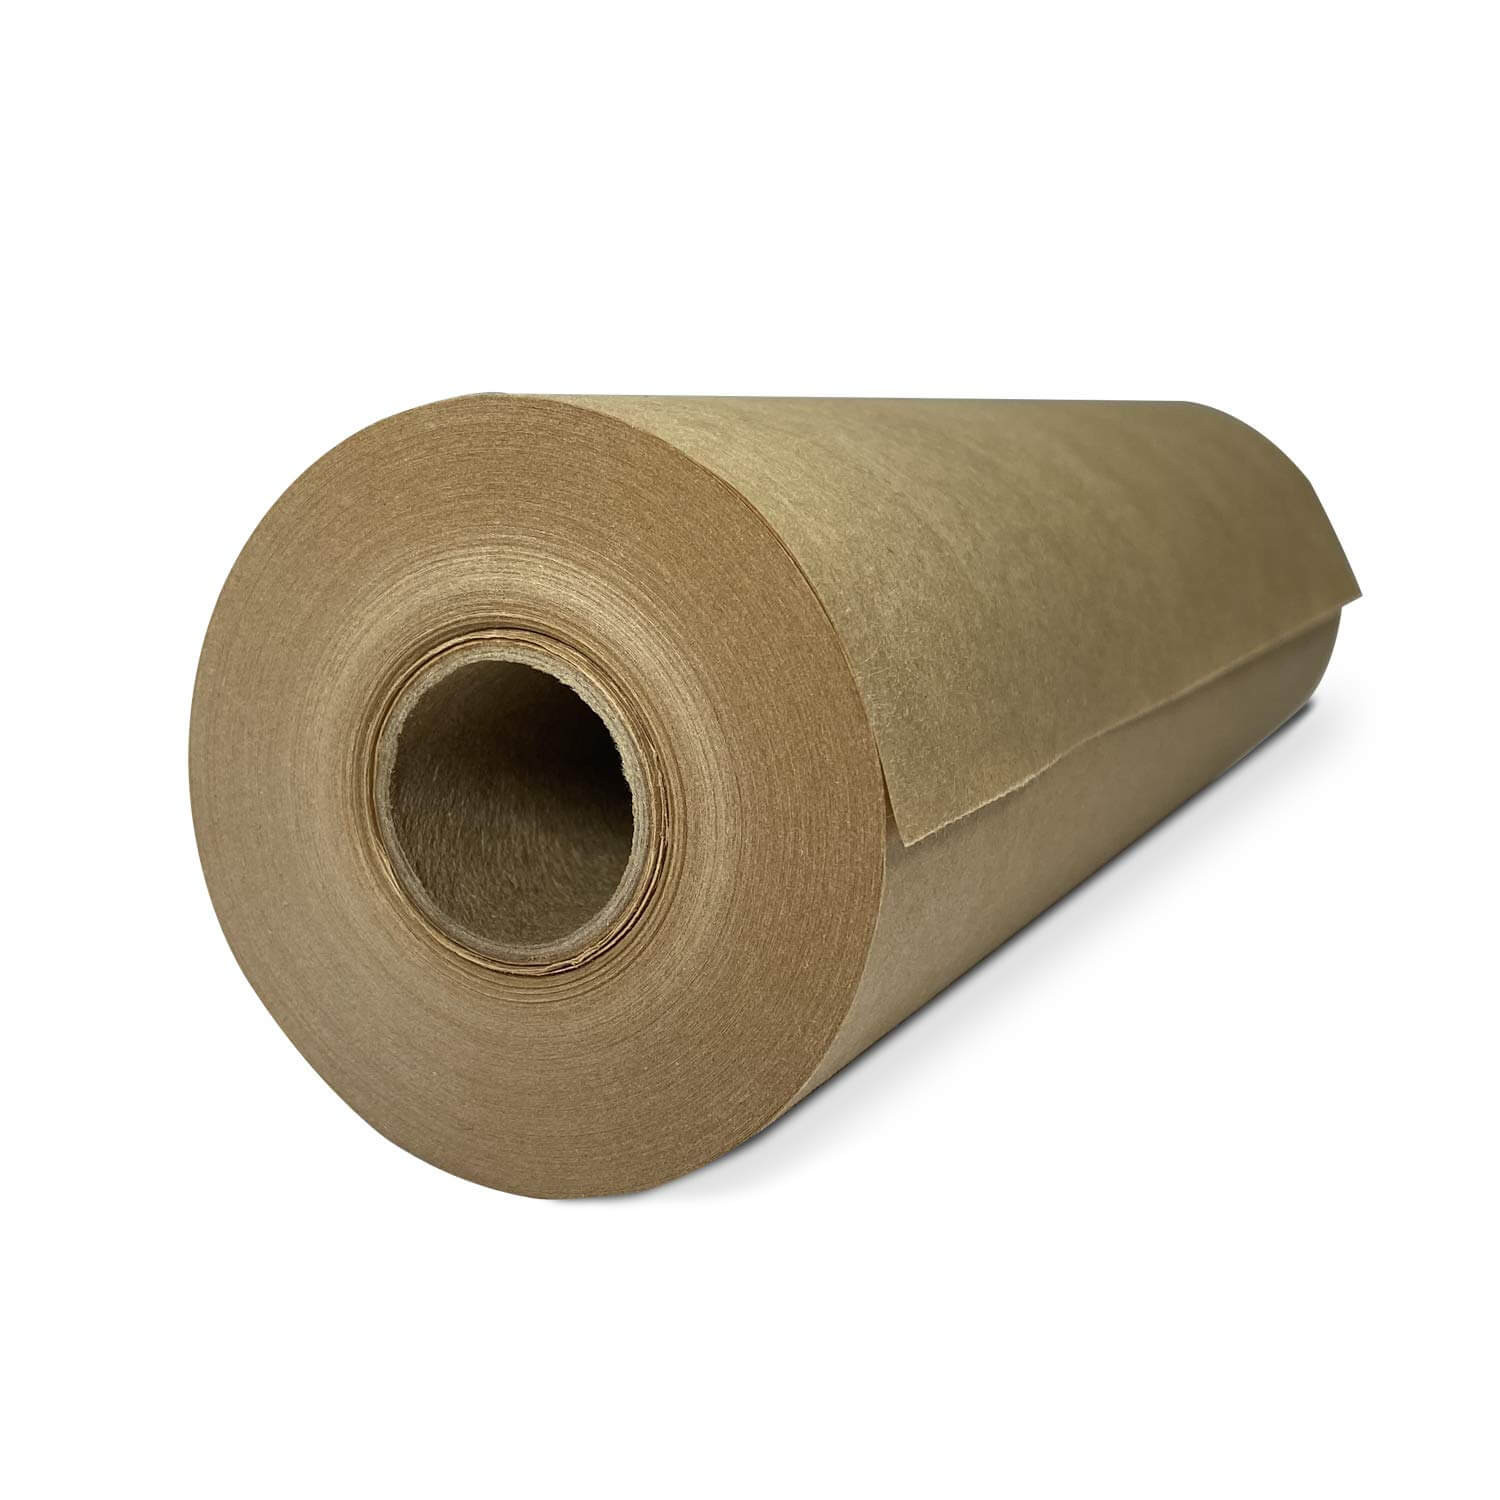 18 x 900' Brown Roll of Wet Wax Paper with Extra Mositure Resistance buy  in stock in U.S. in IDL Packaging